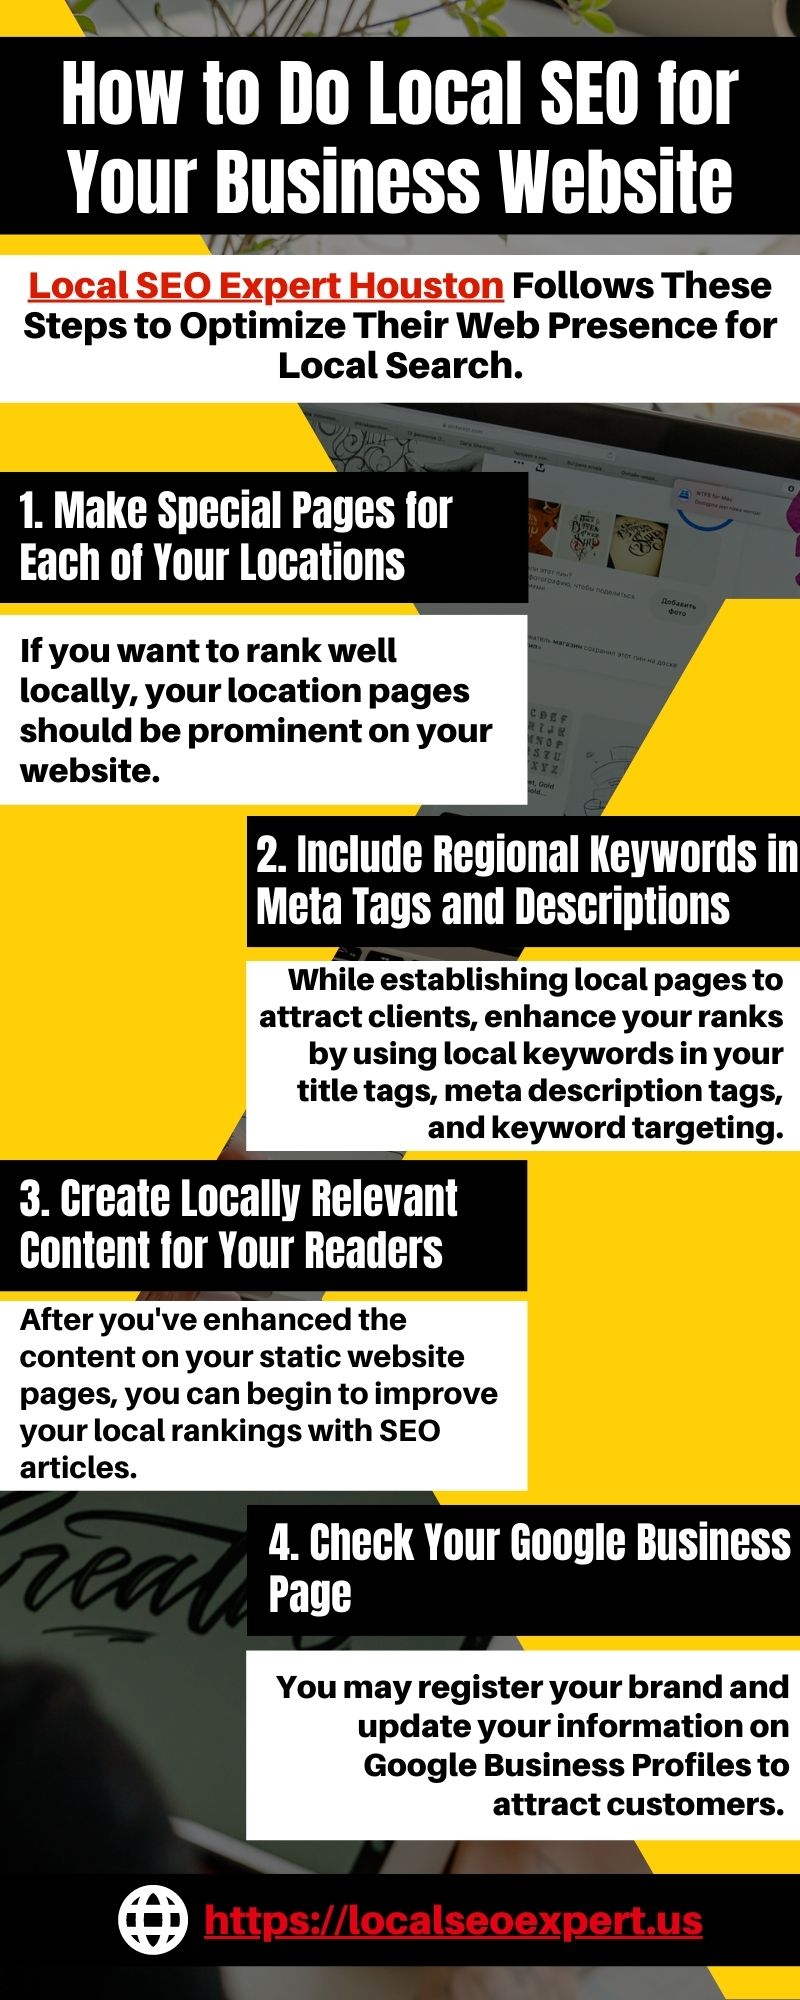 How to Do Local SEO for Your Business Website